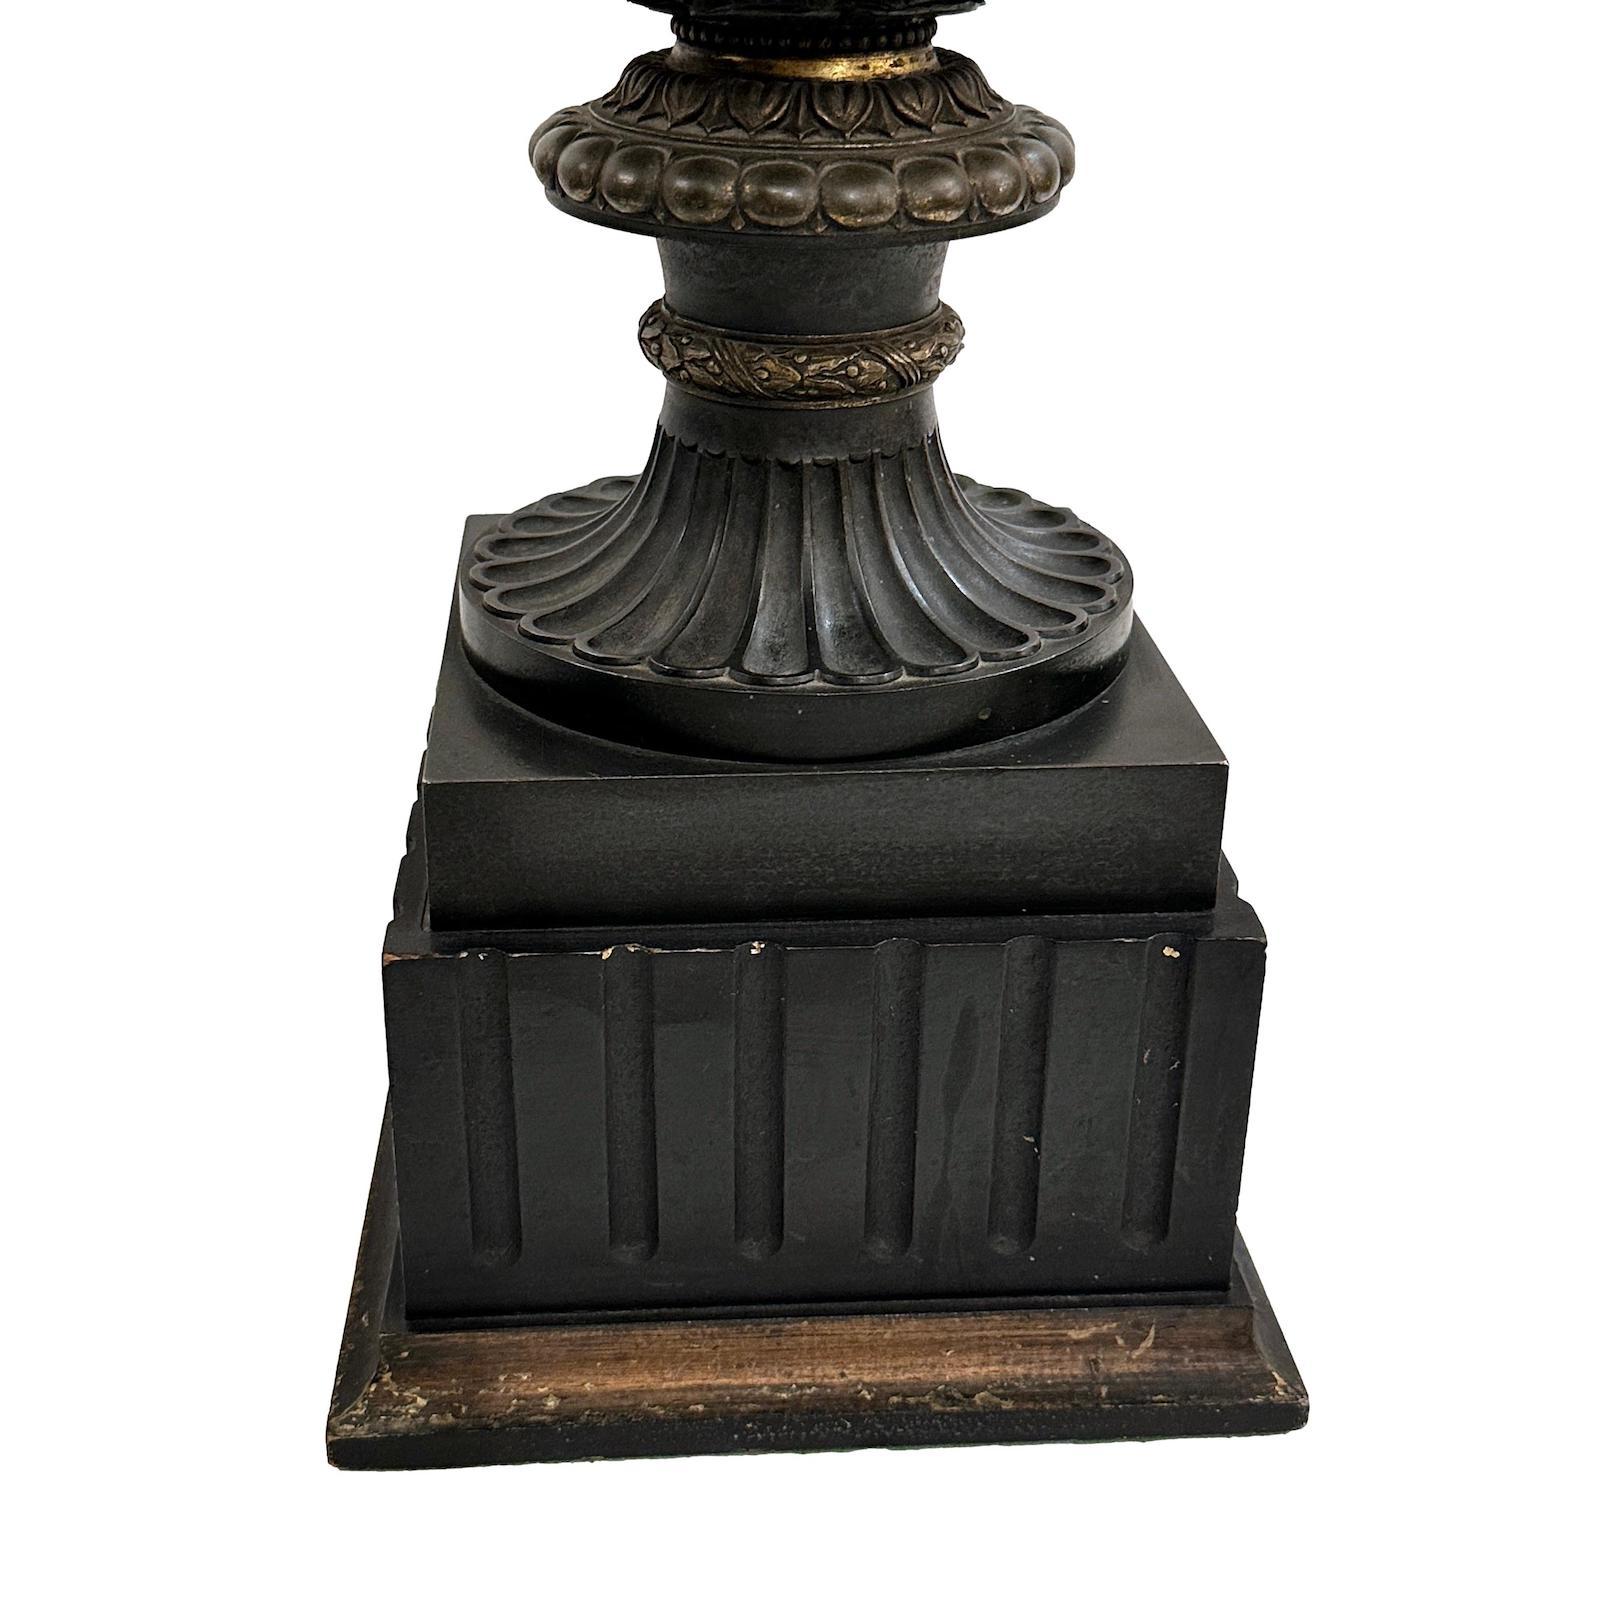 A circa 1920's French bronze urn-shaped table lamp with Neoclassic scenes on body, dark patinated finish and with some gilt details.

Measurements:
Height of body: 18